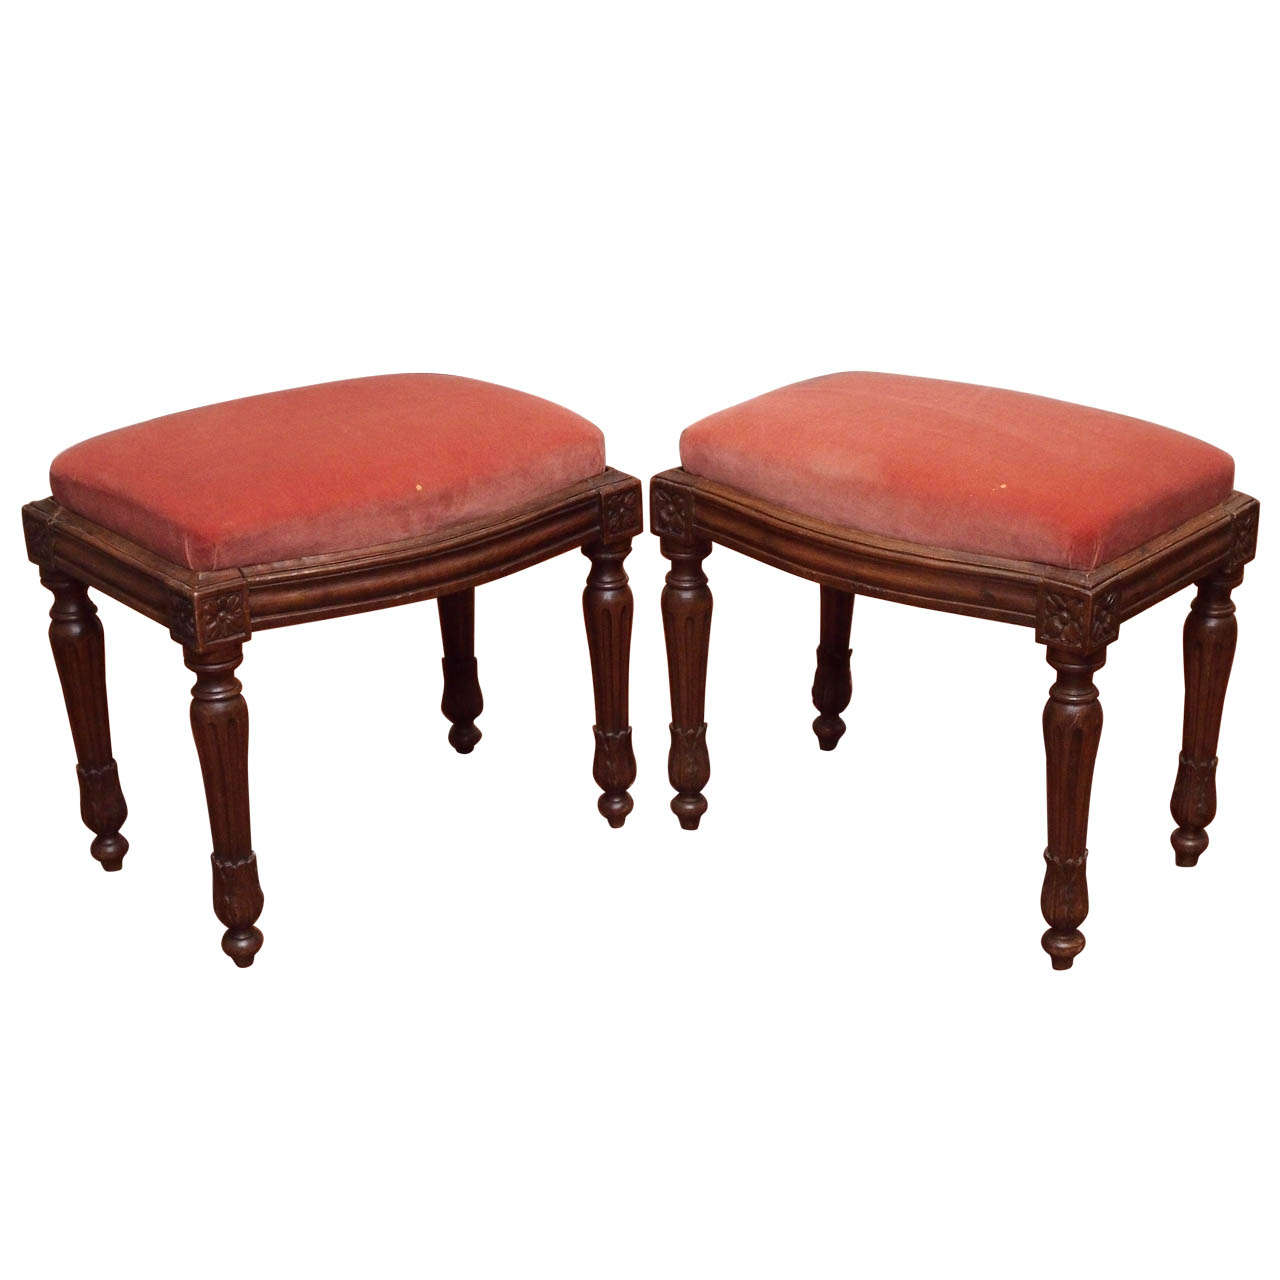 A Pair of Fine Louis XVI Style Tabourets For Sale